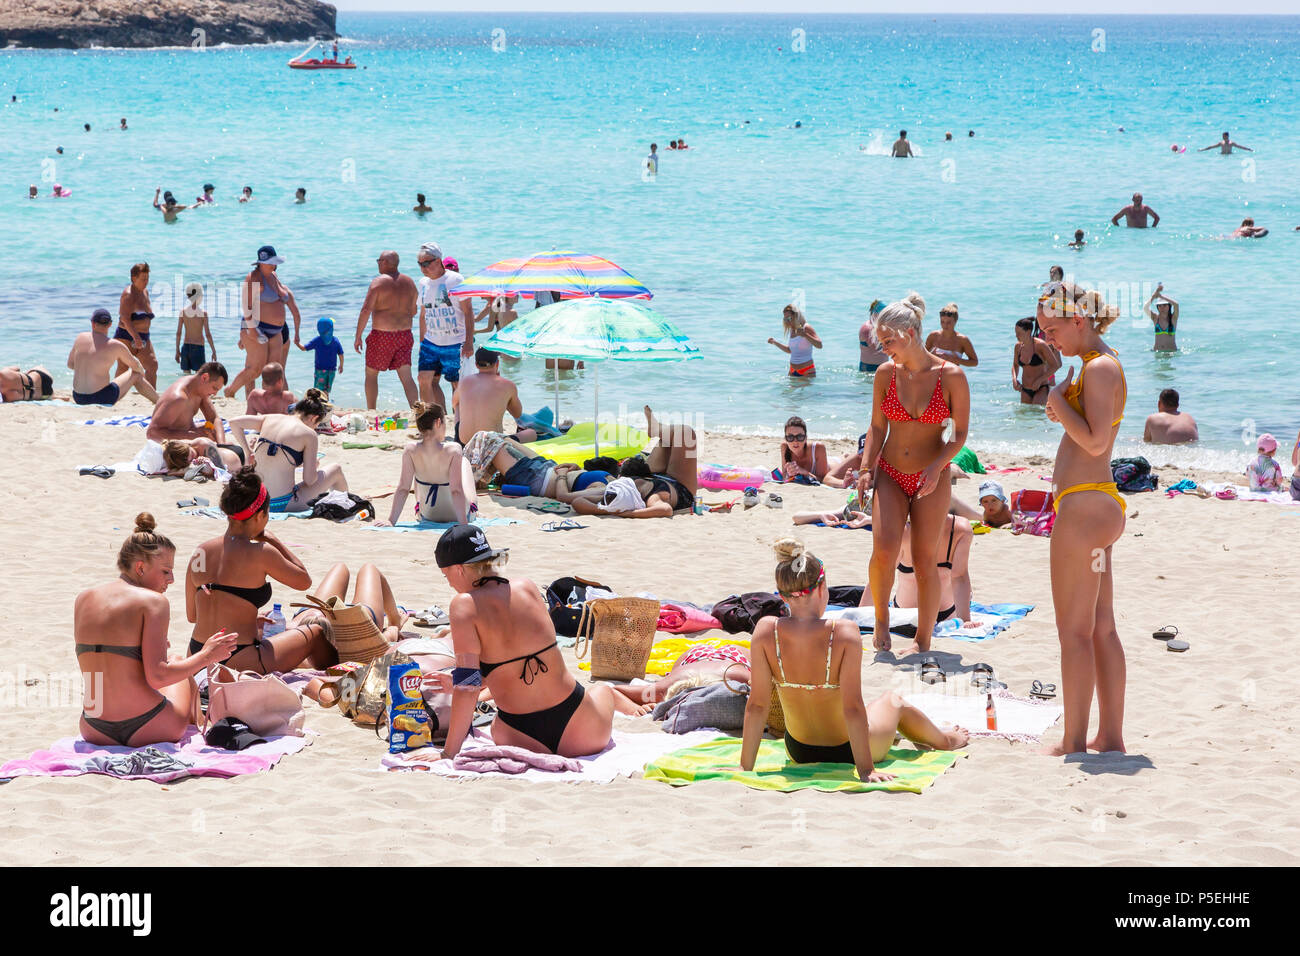 Group of young women sunbathing on the beach at Nissi Bay, Ayia Napa, Cyprus Stock Photo